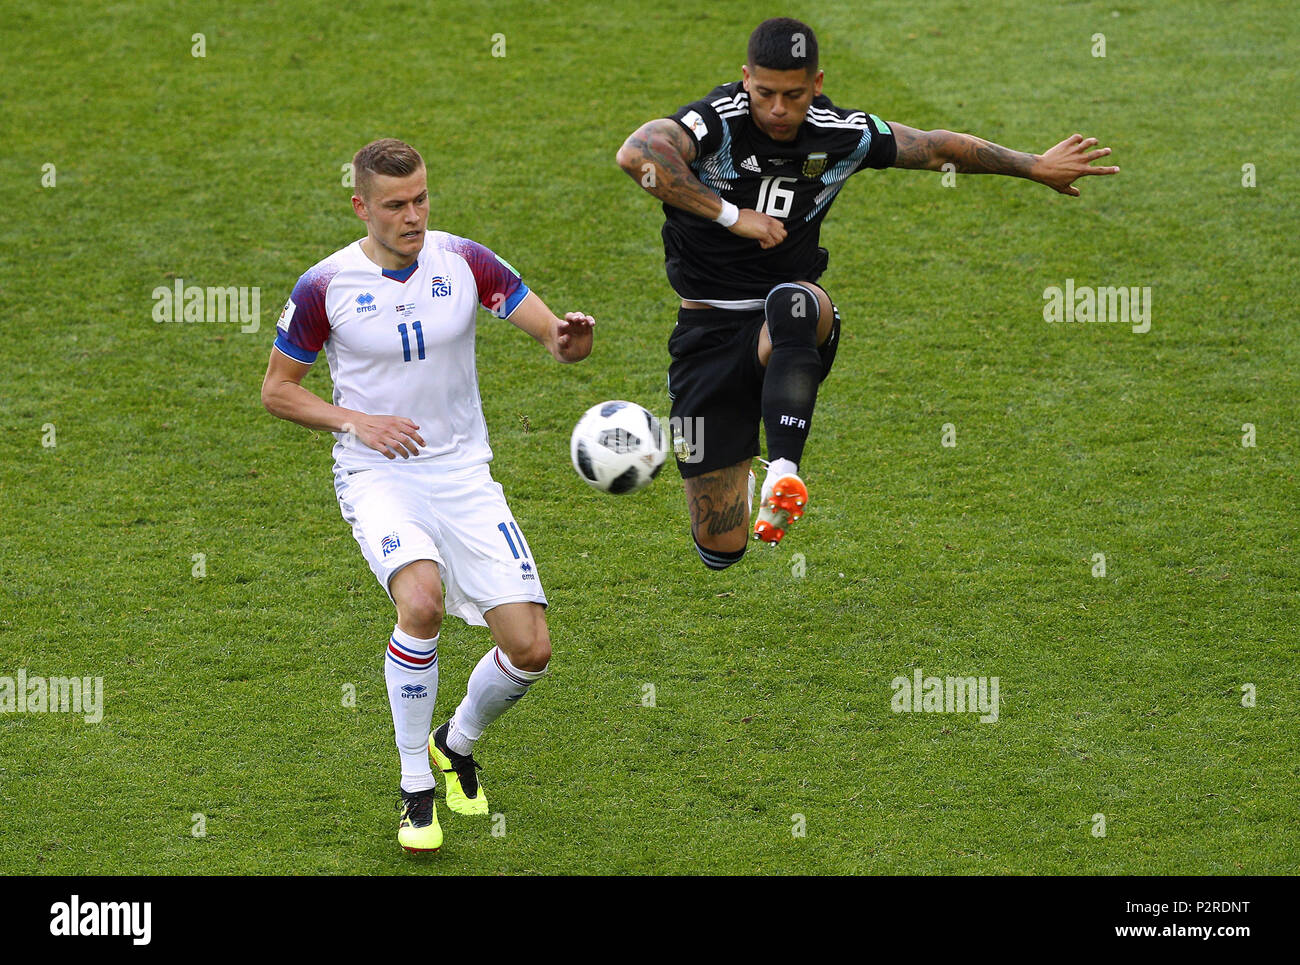 Moscow, Russia. 16th Jun, 2018. Alfred FINNBOGASON of Iceland plays ball with Marcos ROJO from Argentina during the match between Argentina and Iceland valid for the 2018 World Cup held at the Otkrytie Arena (Spartak) in Moscow, Russia. Credit: Foto Arena LTDA/Alamy Live News Credit: Foto Arena LTDA/Alamy Live News Stock Photo